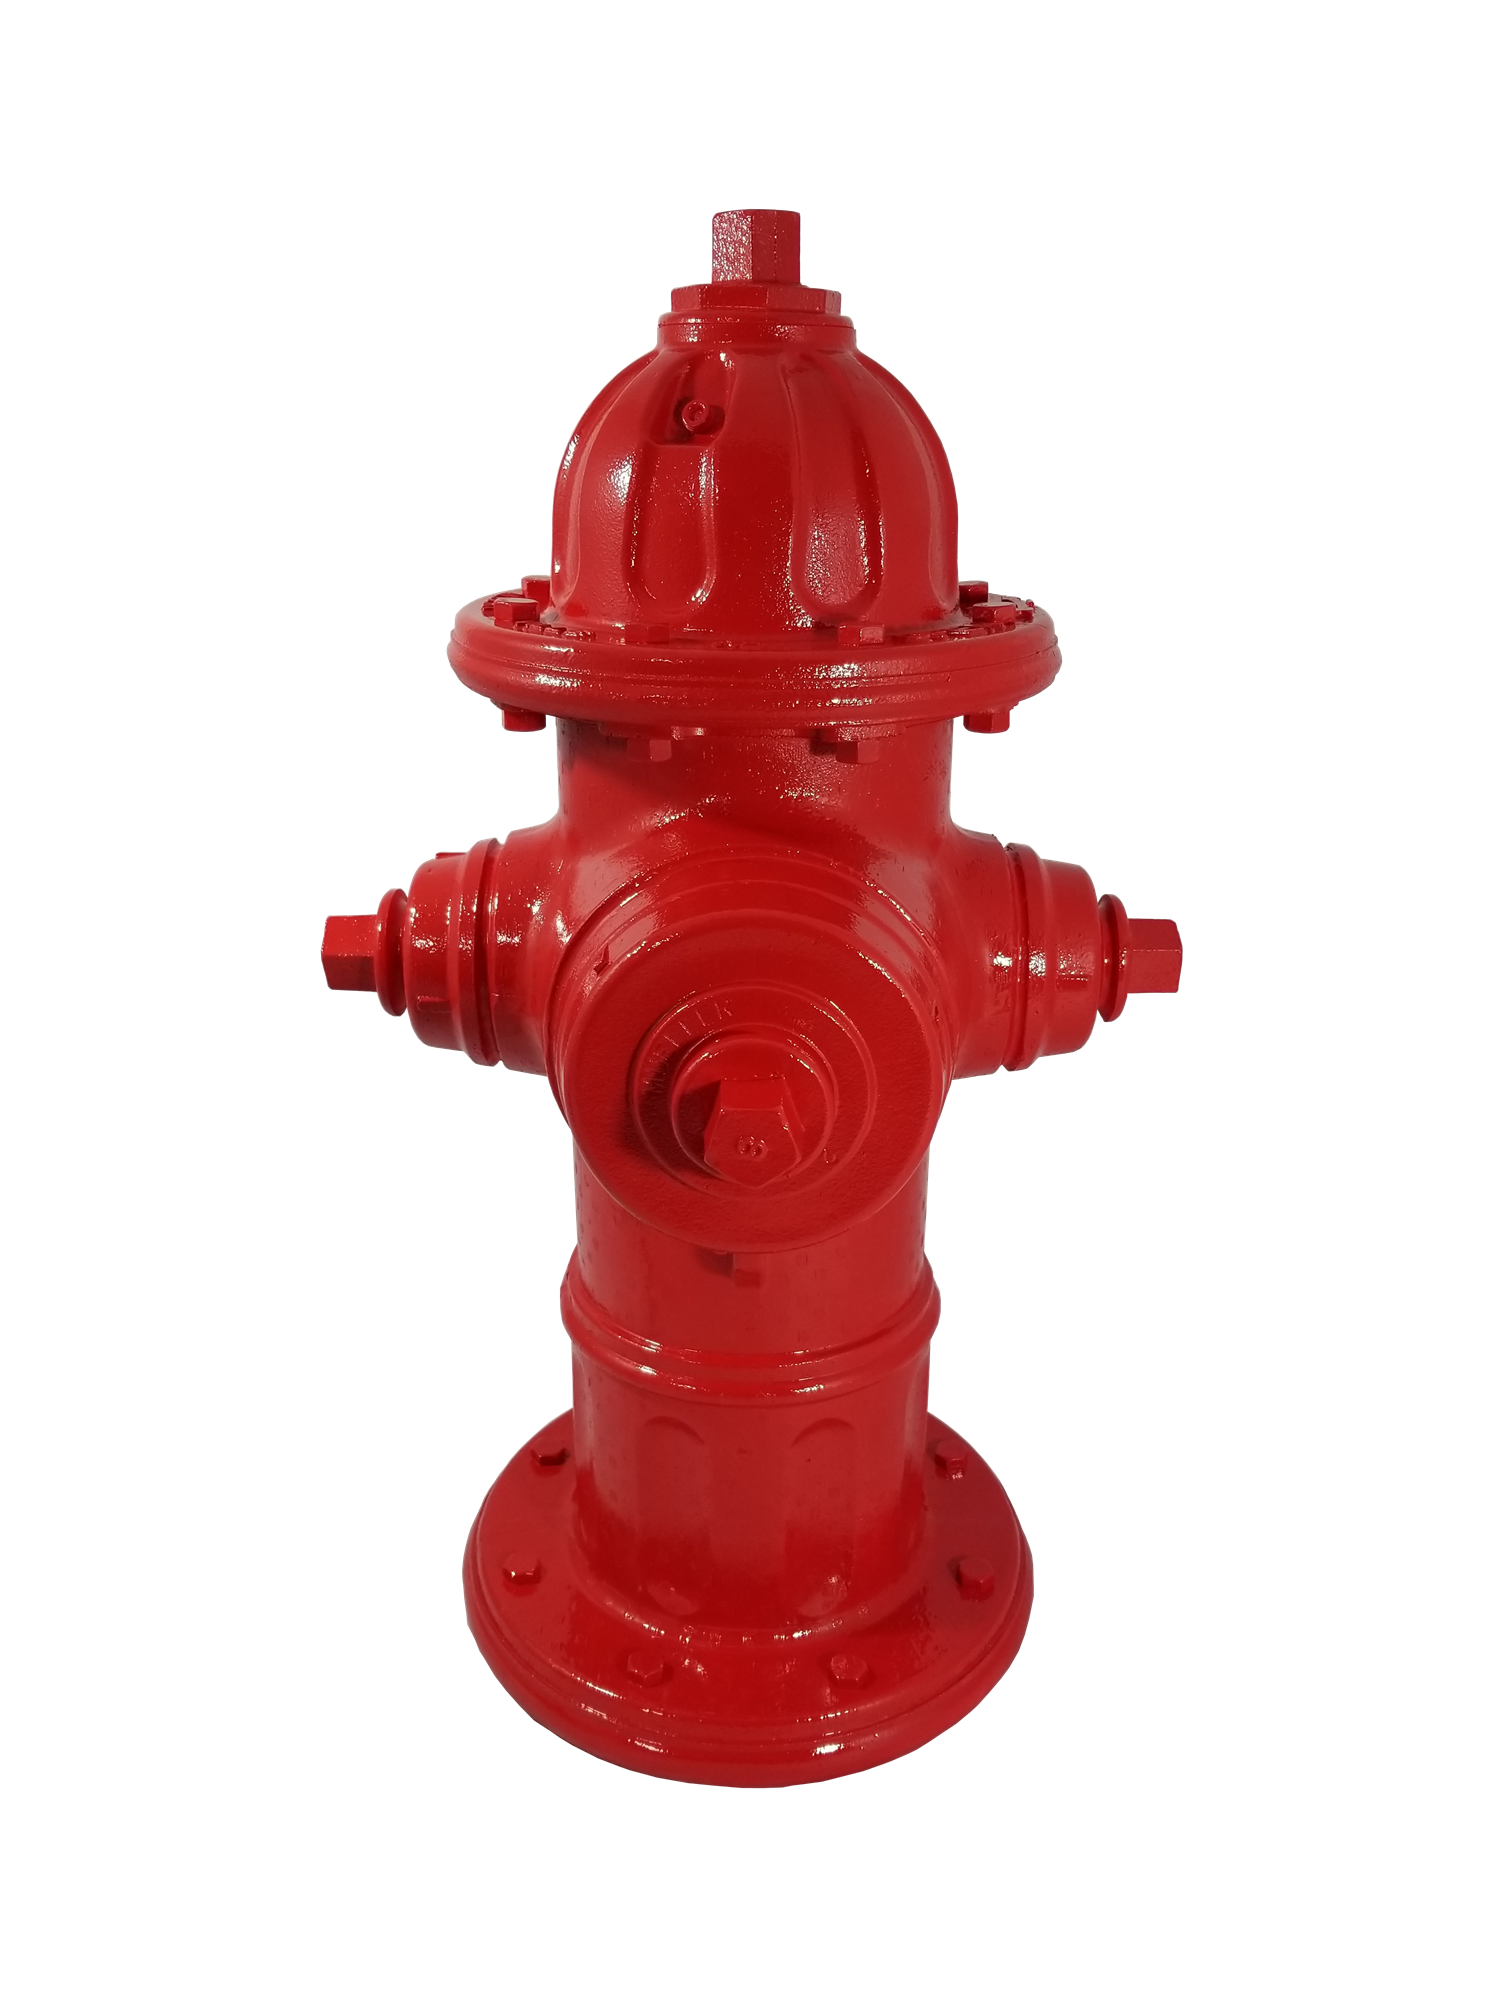 Download PNG image - Fire Hydrant Transparent Background 